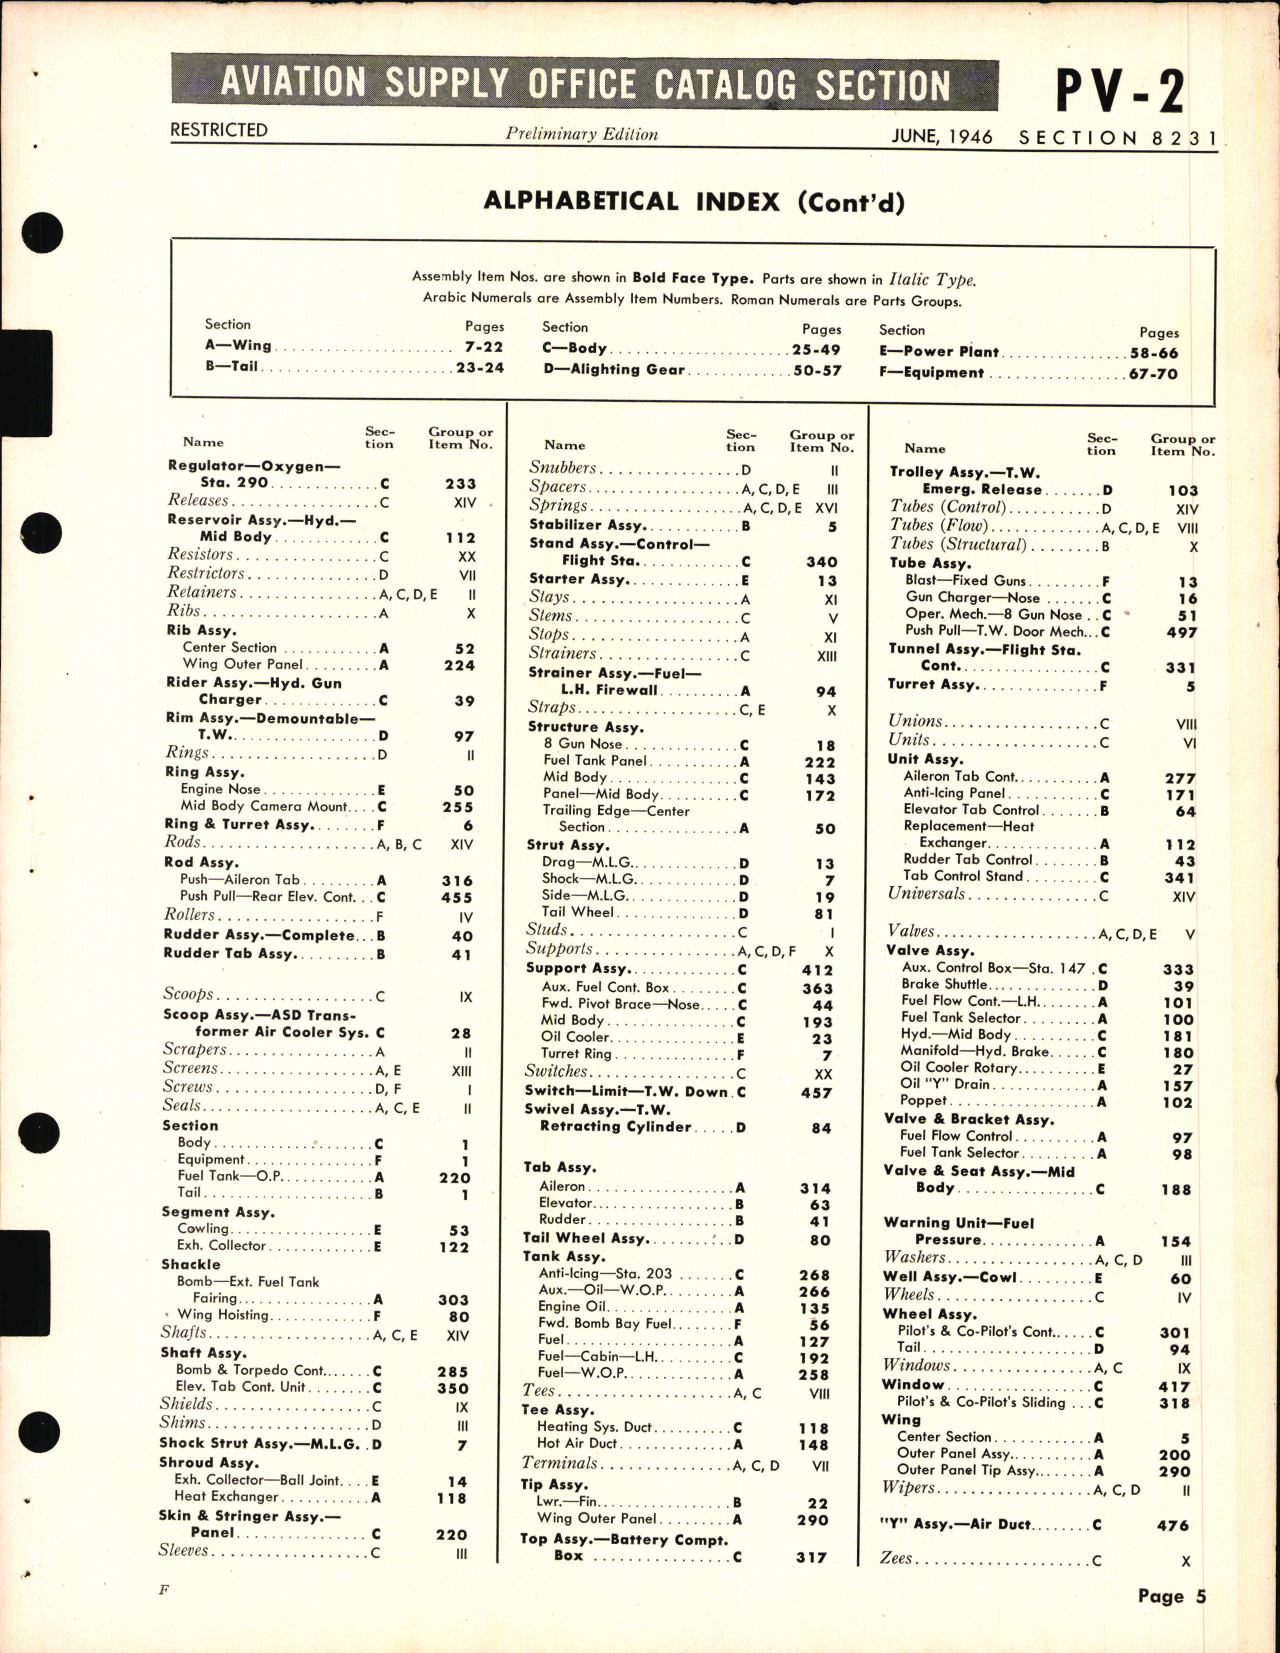 Sample page 5 from AirCorps Library document: PV-2 Harpoon Availability List and Airframe Spare Parts